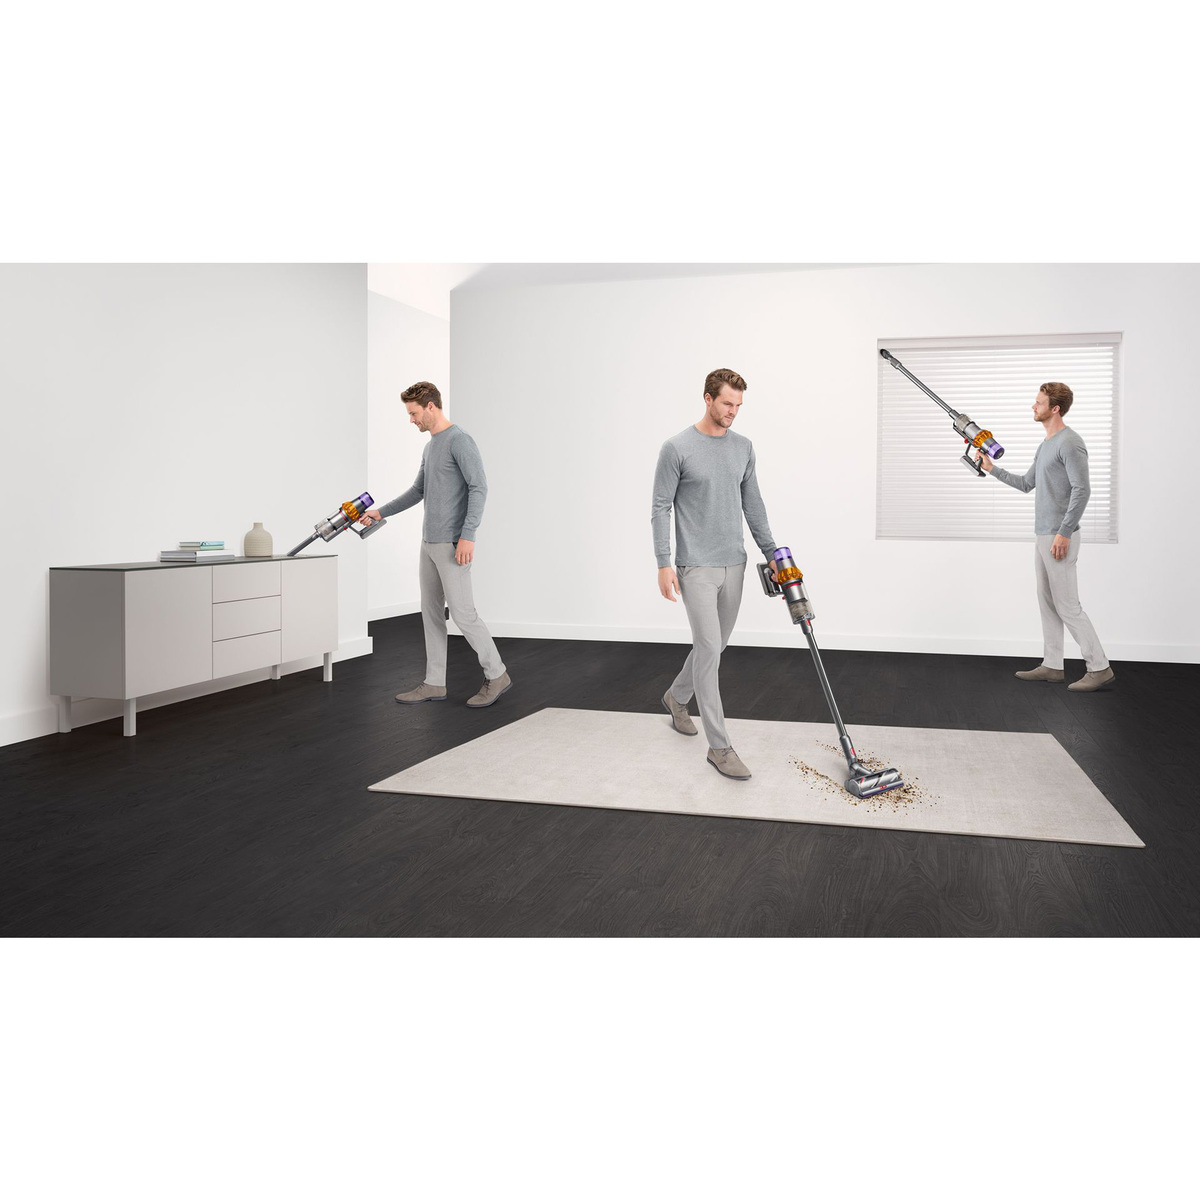 Dyson V15 Detect Extra Cordless Portable Vacuum Cleaner, Blue